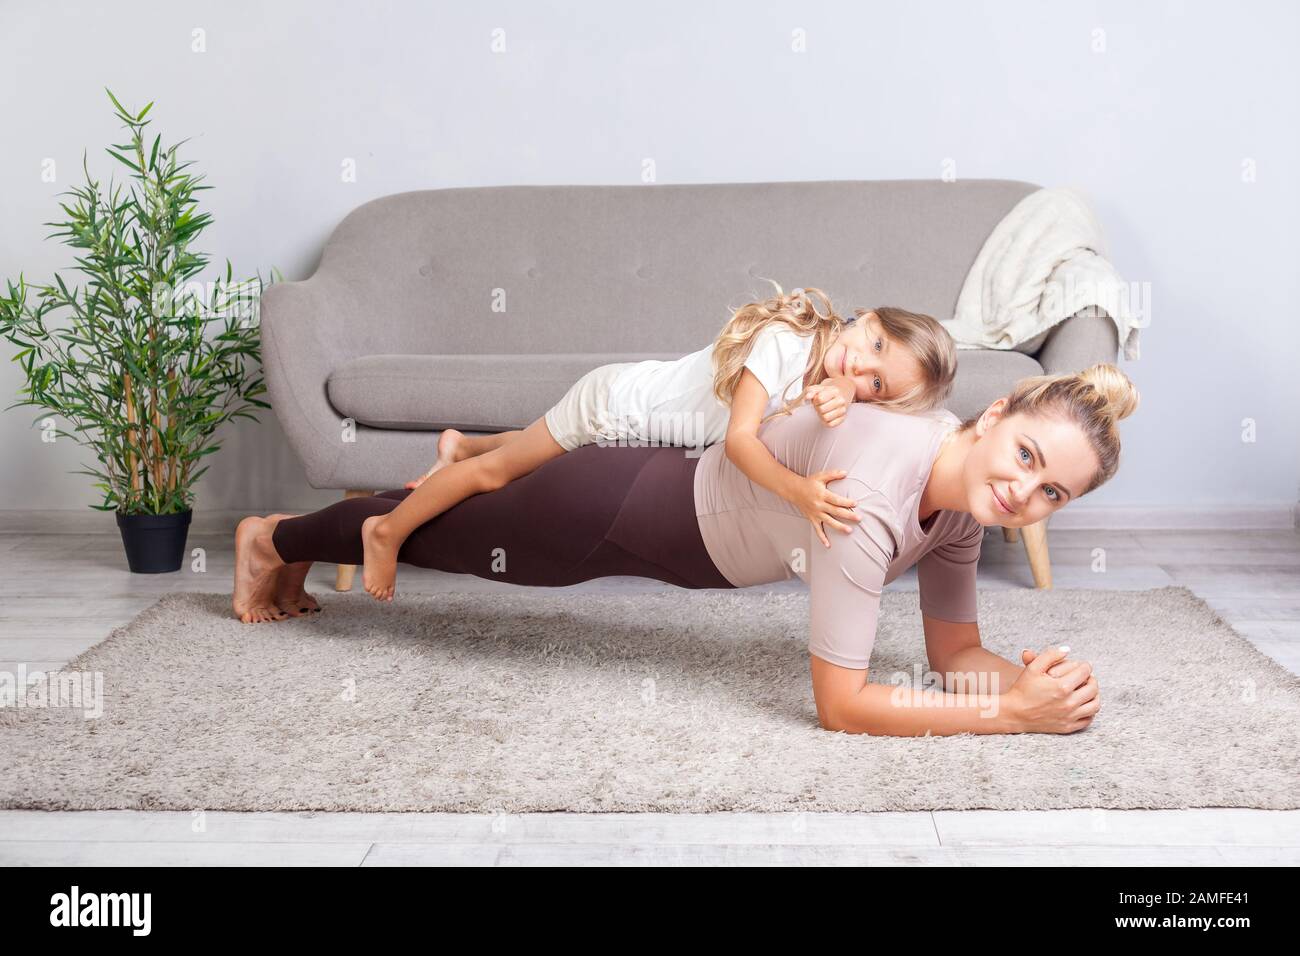 Cheerful mother doing plank workout with little daughter on her back, having fun smiling at camera, happy family doing gymnastics exercise together, f Stock Photo